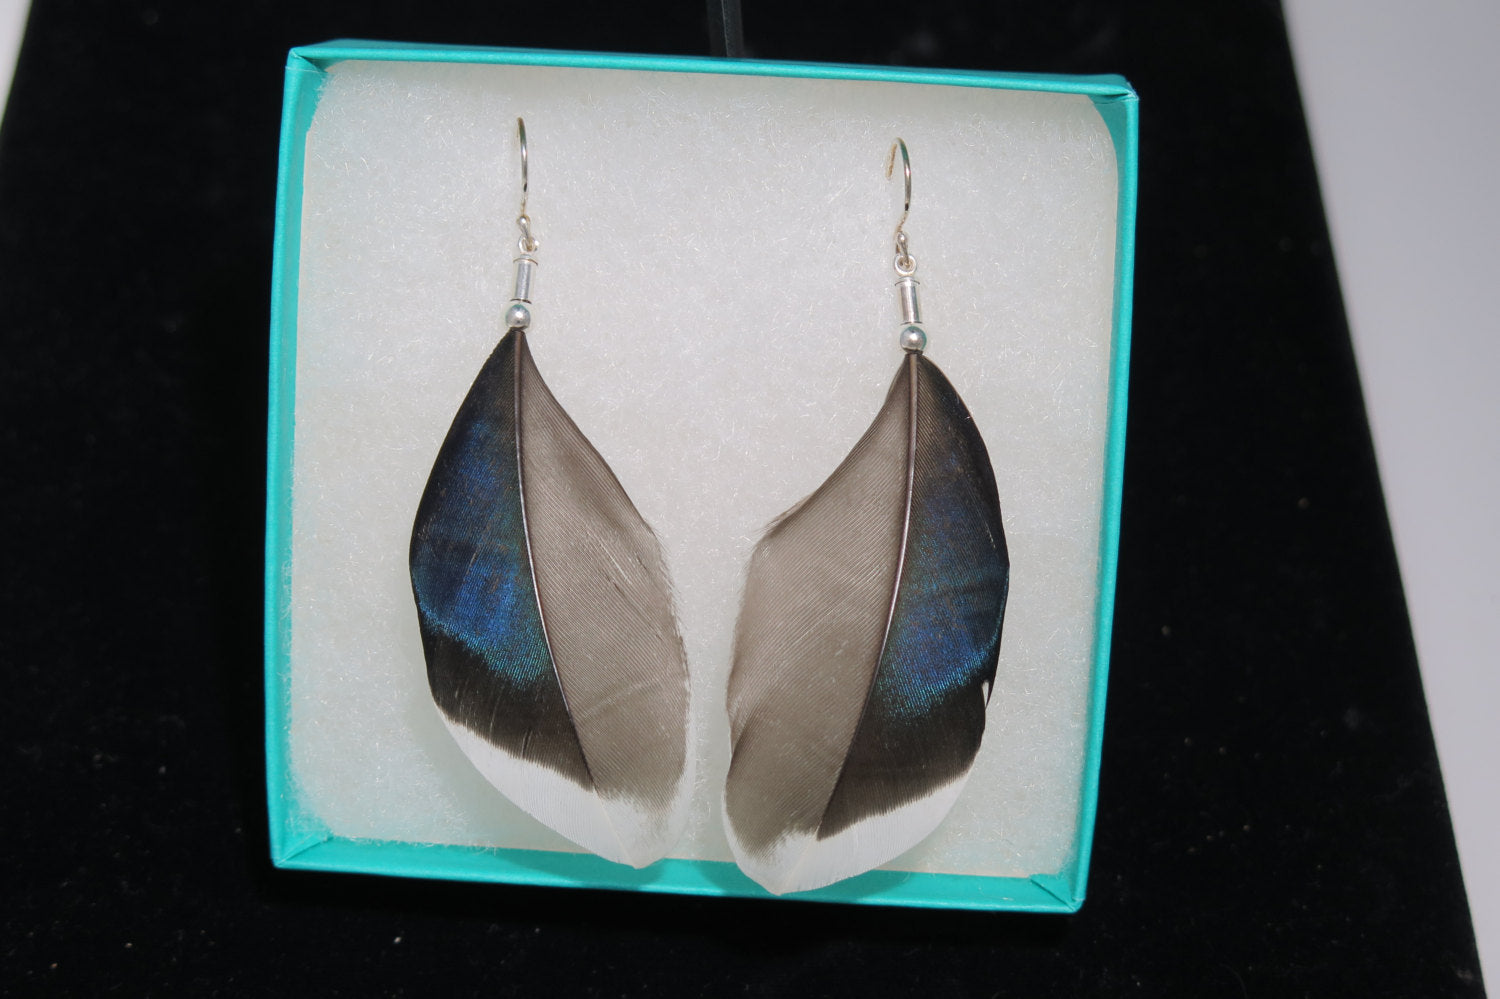 feather real mallard duck feather sterling silver drop earrings iridescent purple select drop length free gift box